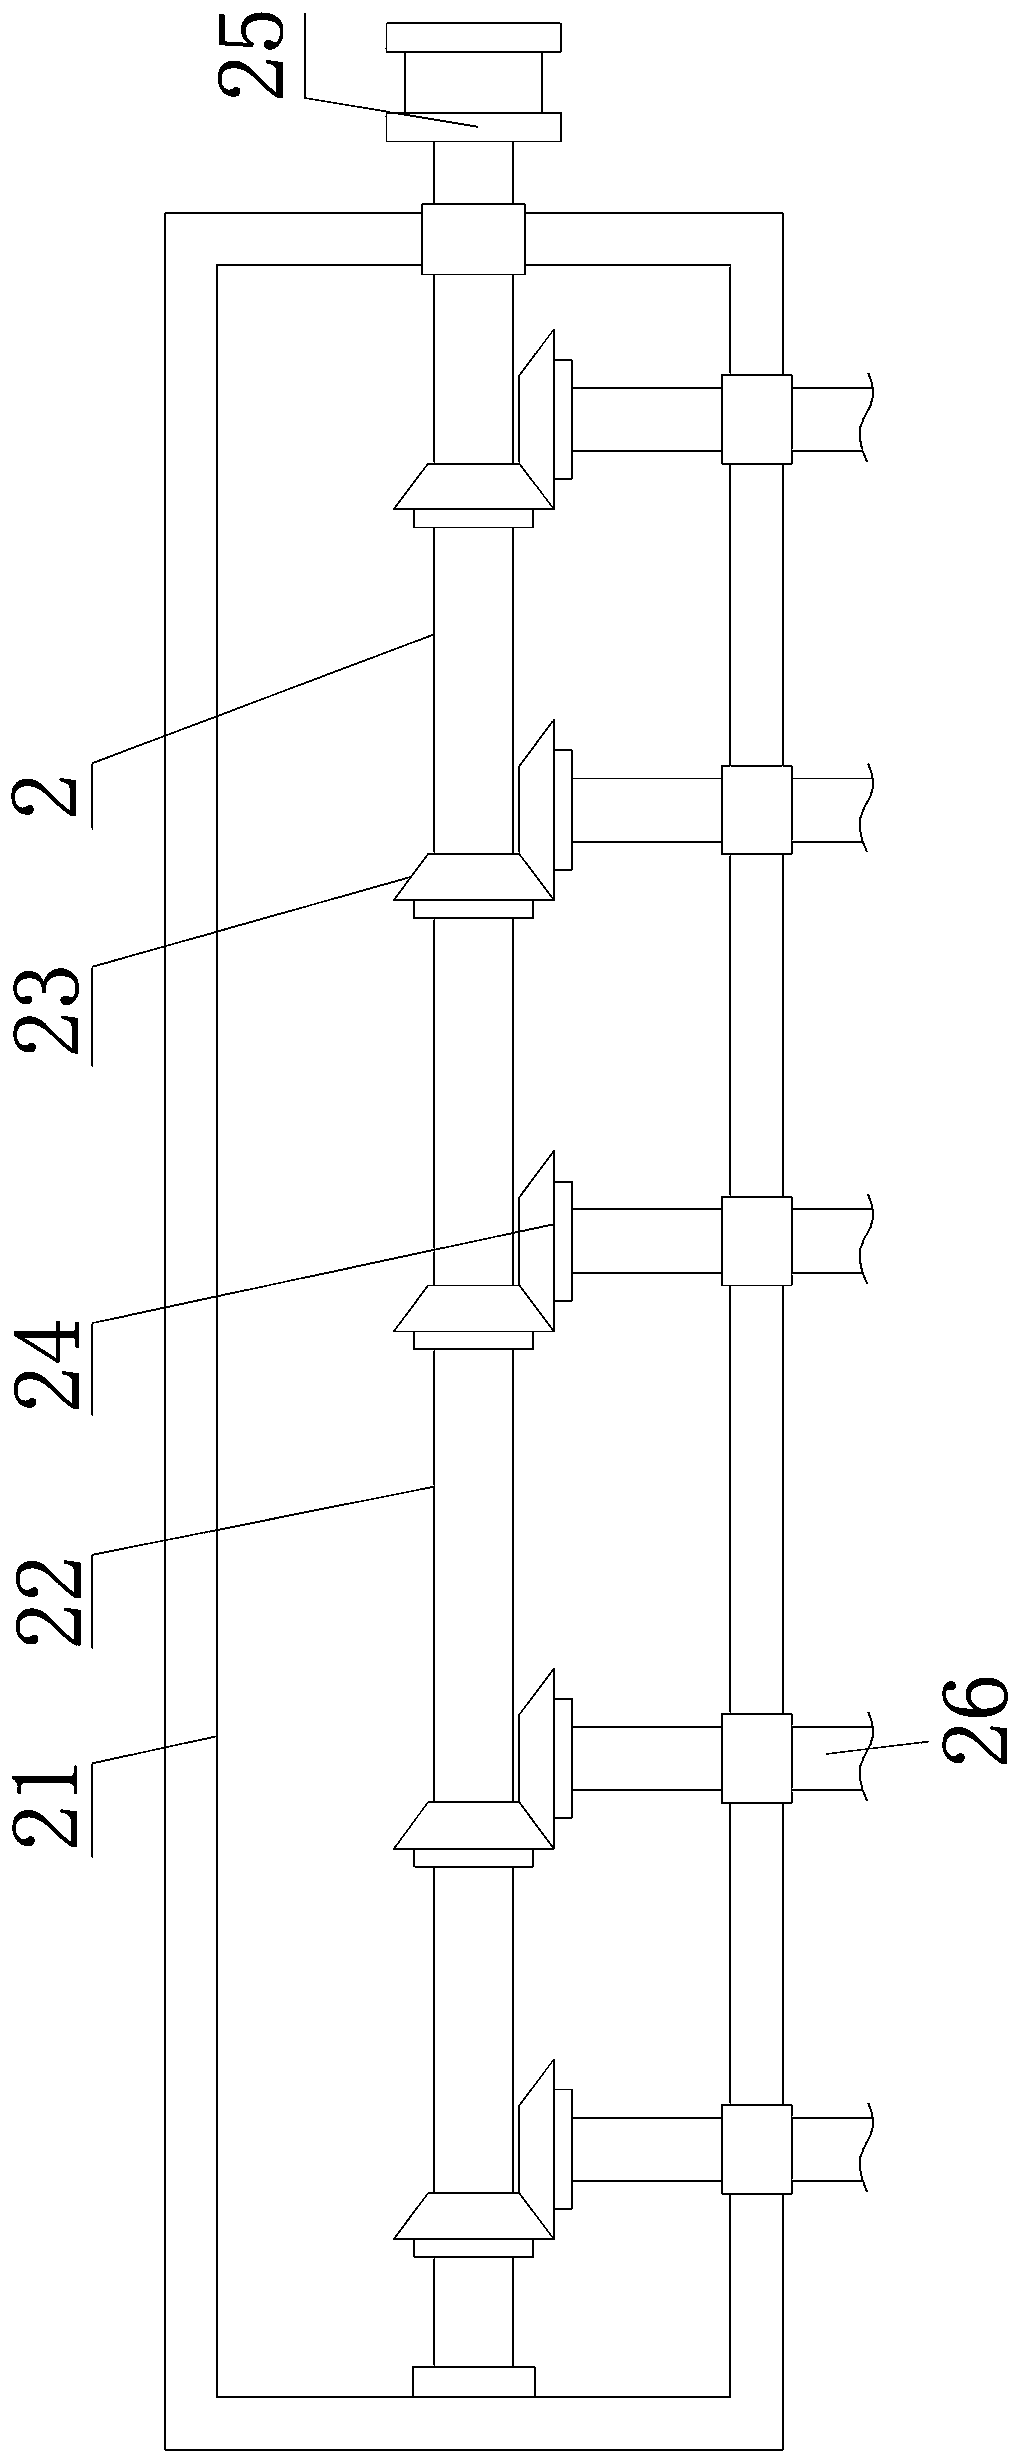 Concrete curing film covering device for building construction